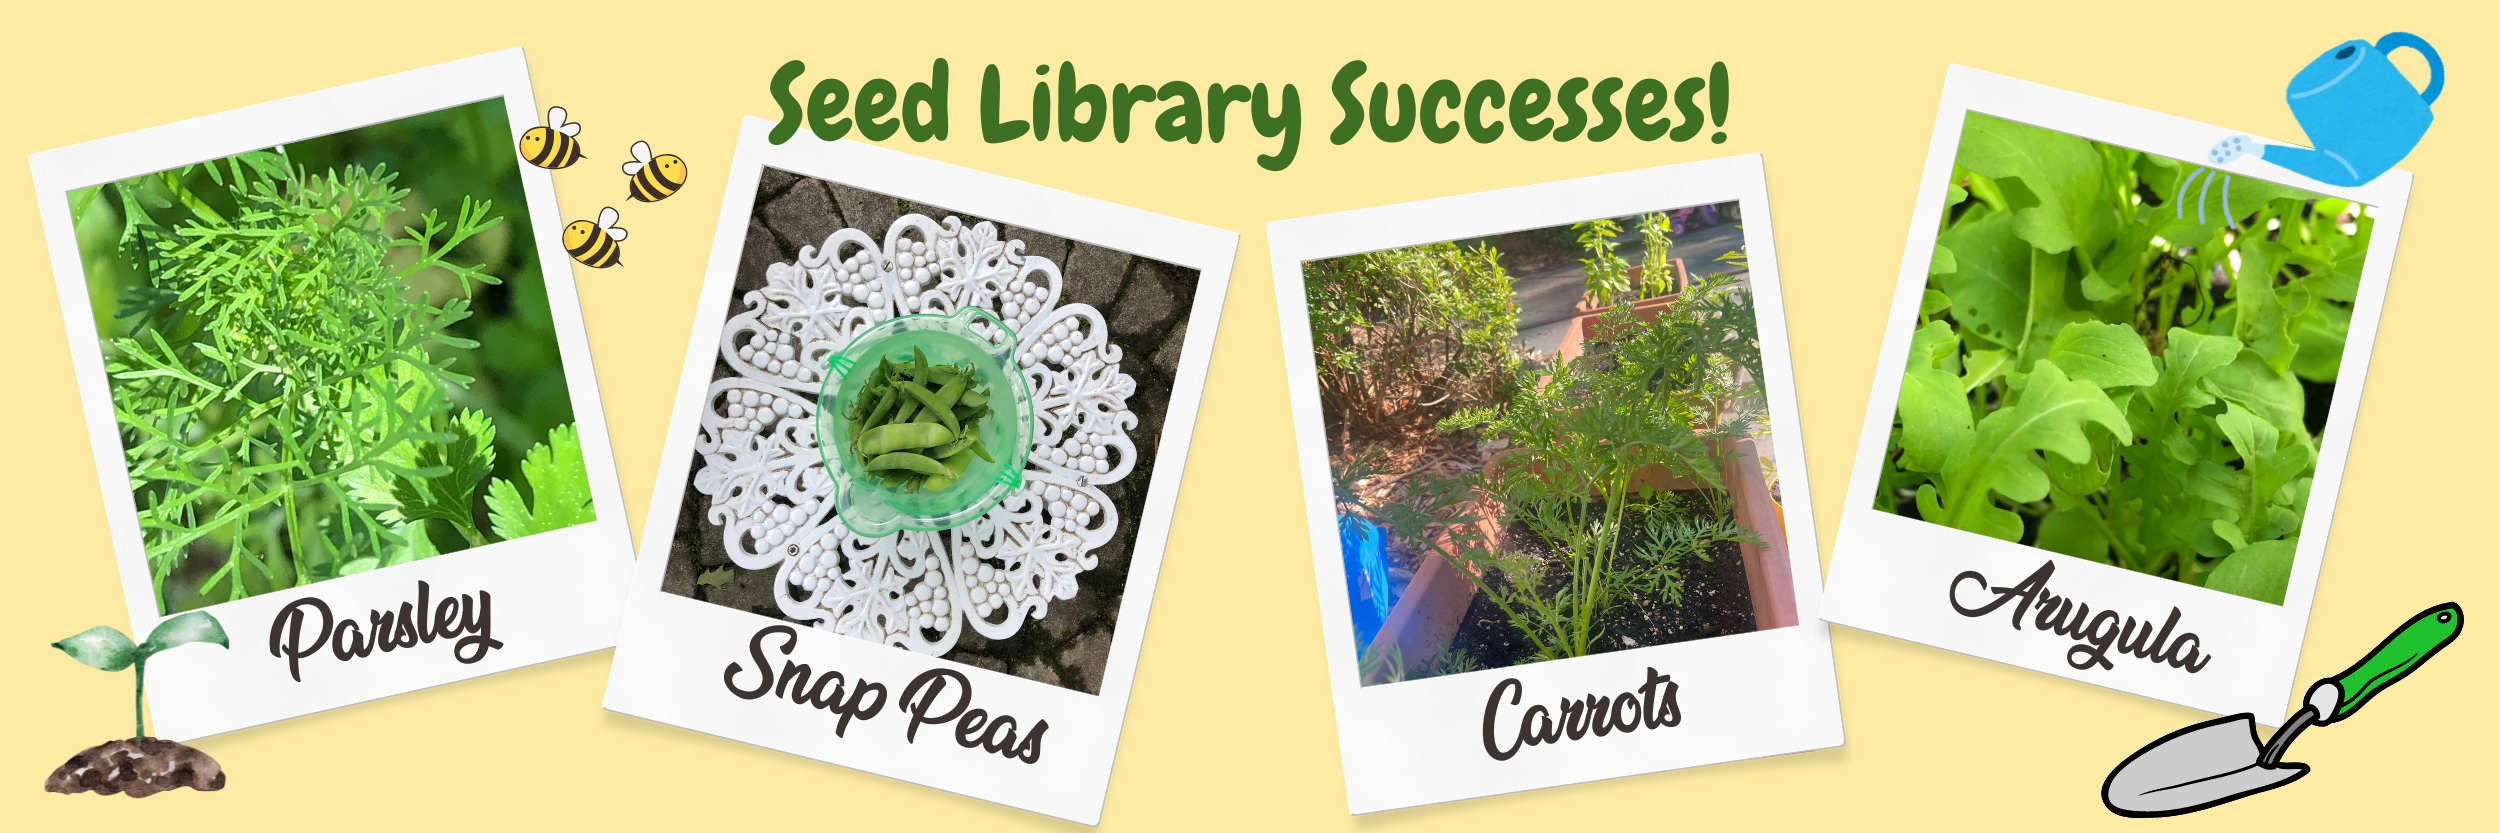 Seed Library Successes photos #2